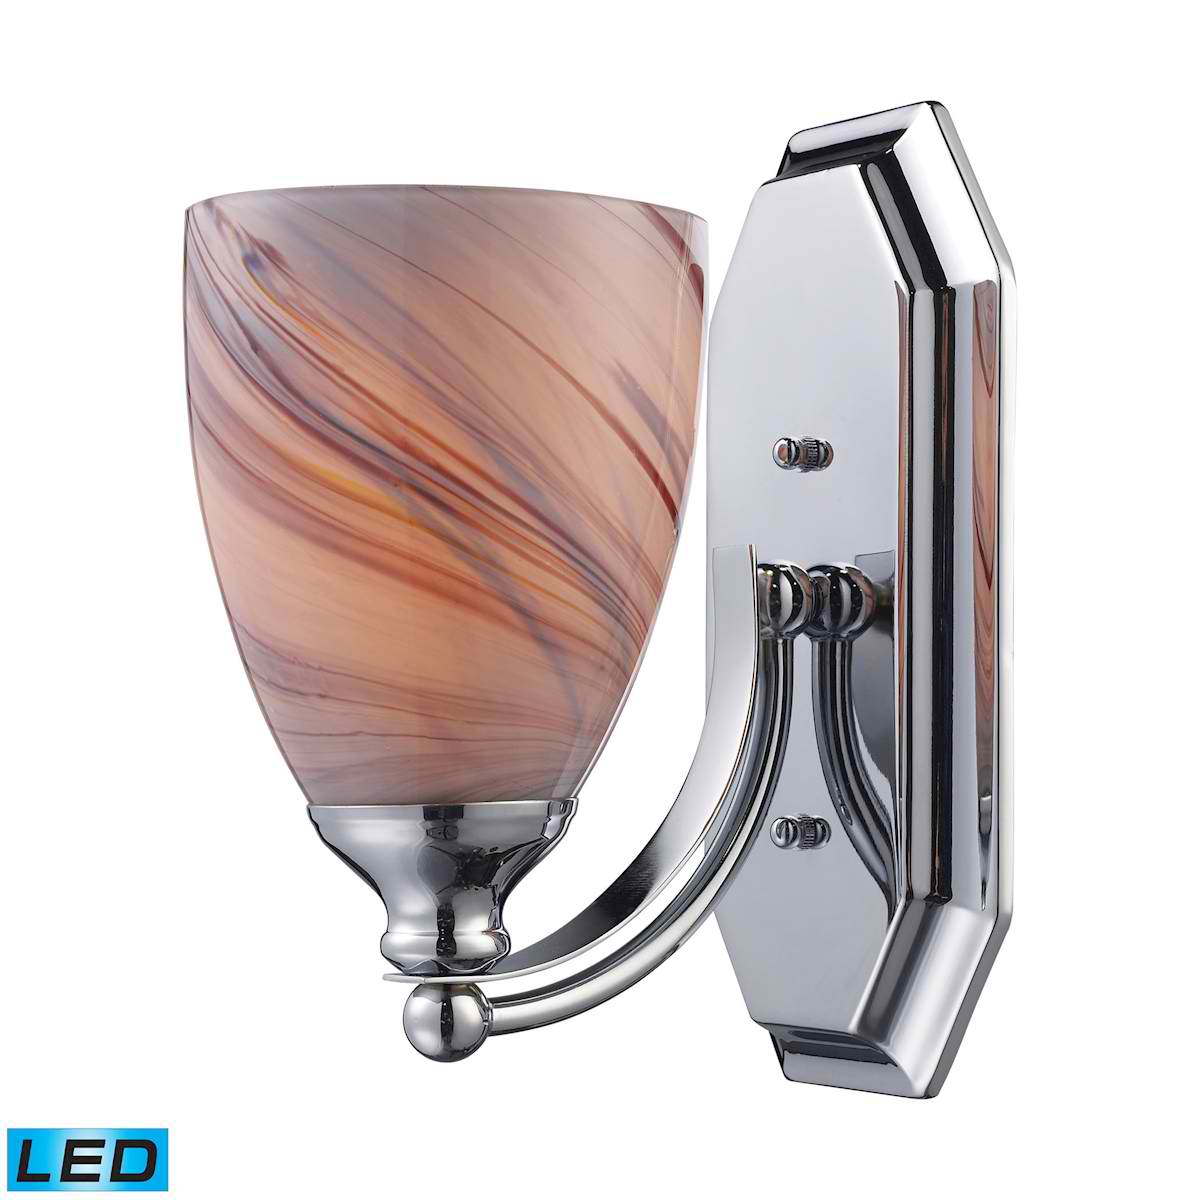 1 Light Vanity in Polished Chrome and Creme Glass - LED Offering Up To 800 Lumens (60 Watt Equivalent)